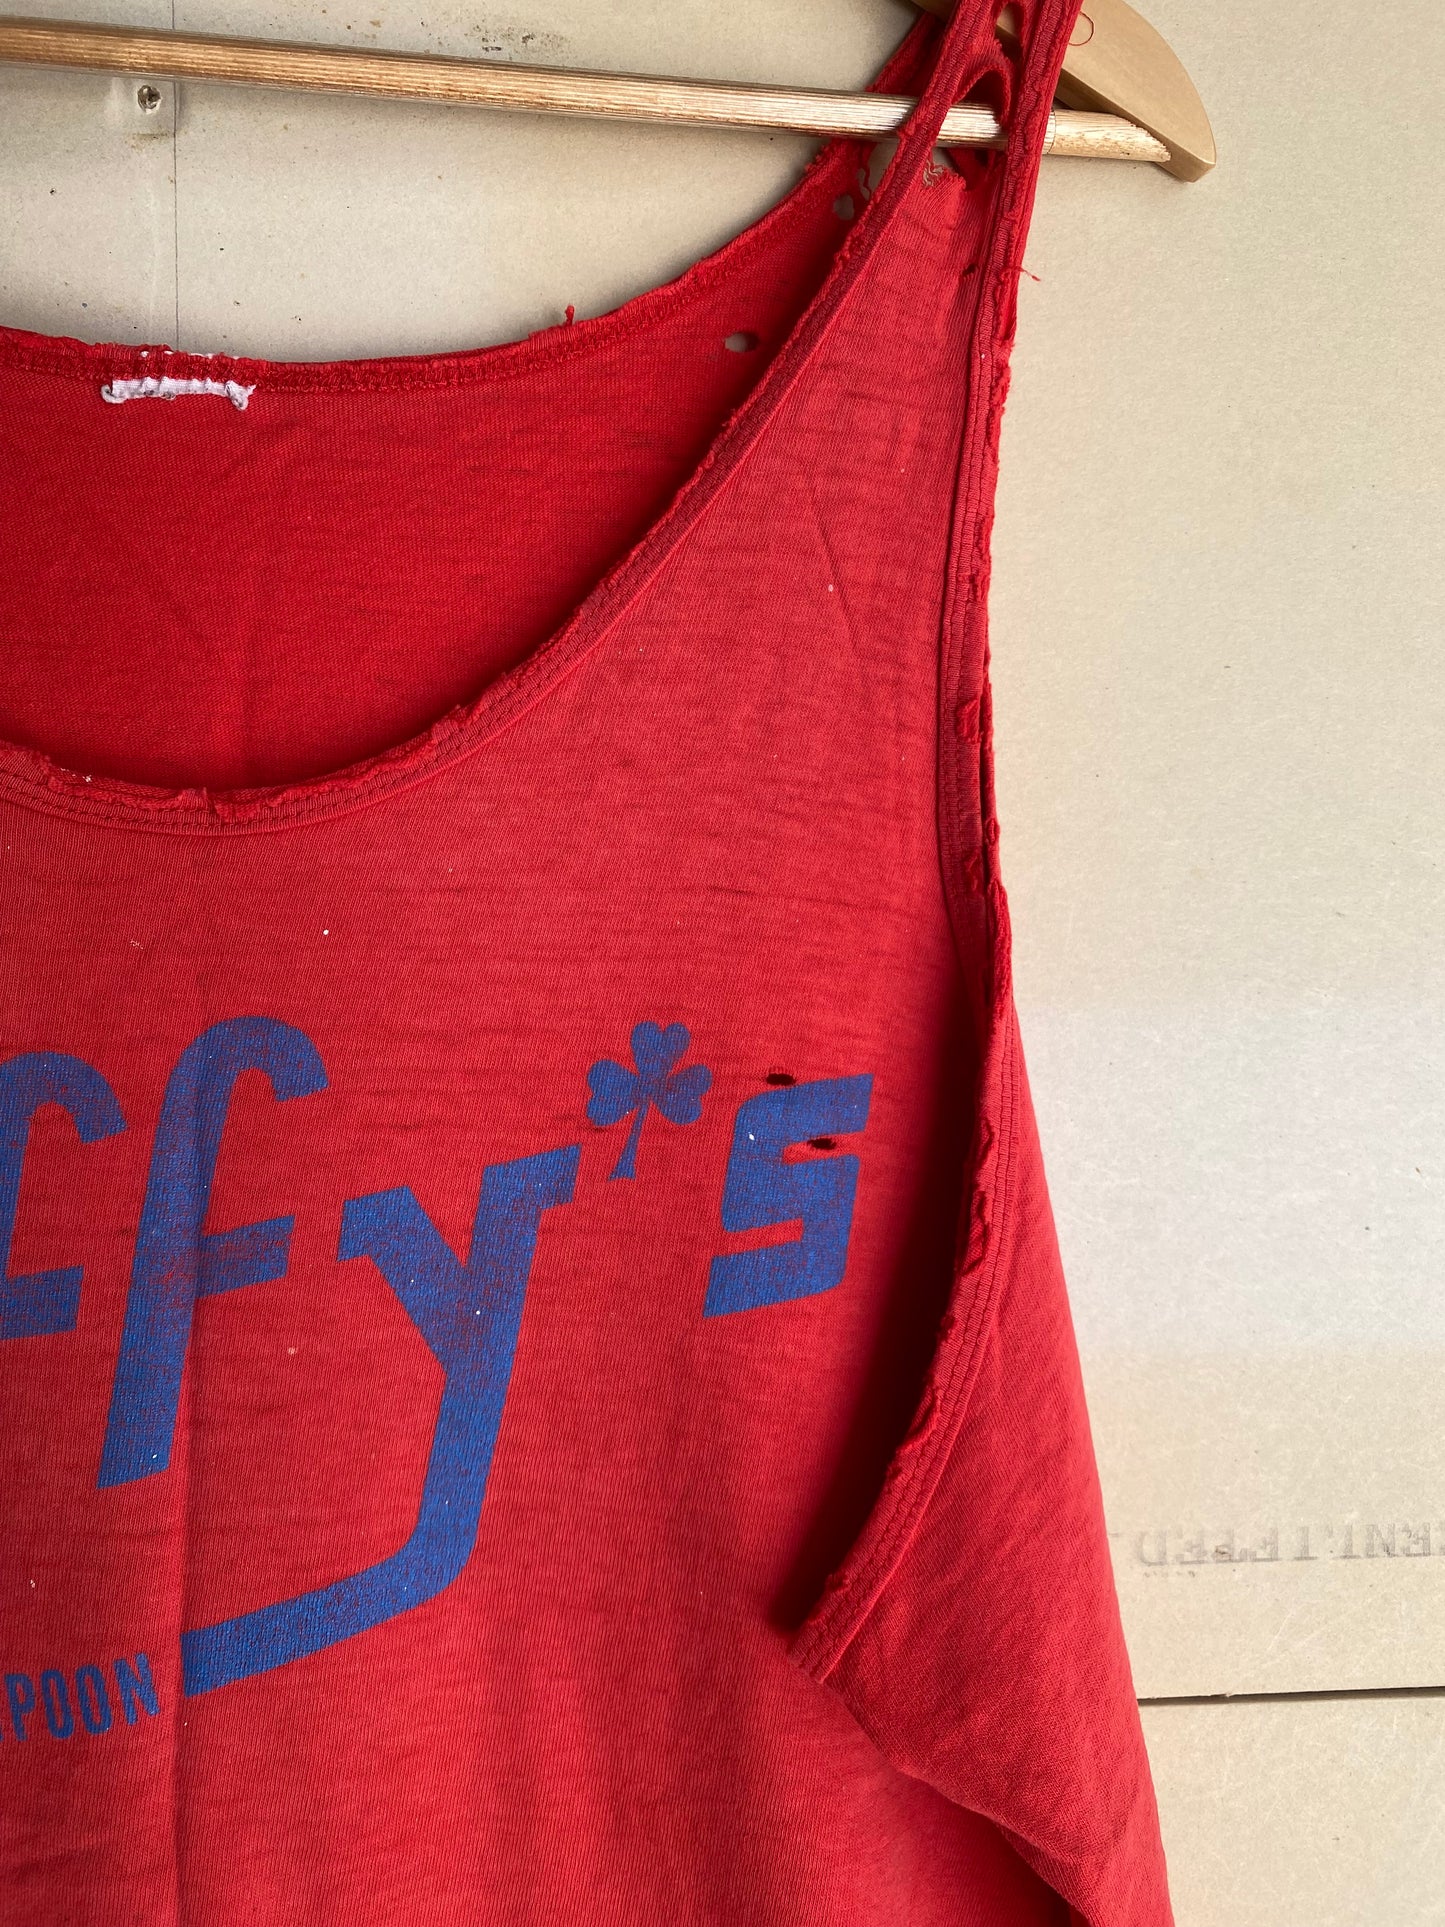 1990s Faded and Distressed Tank | XL